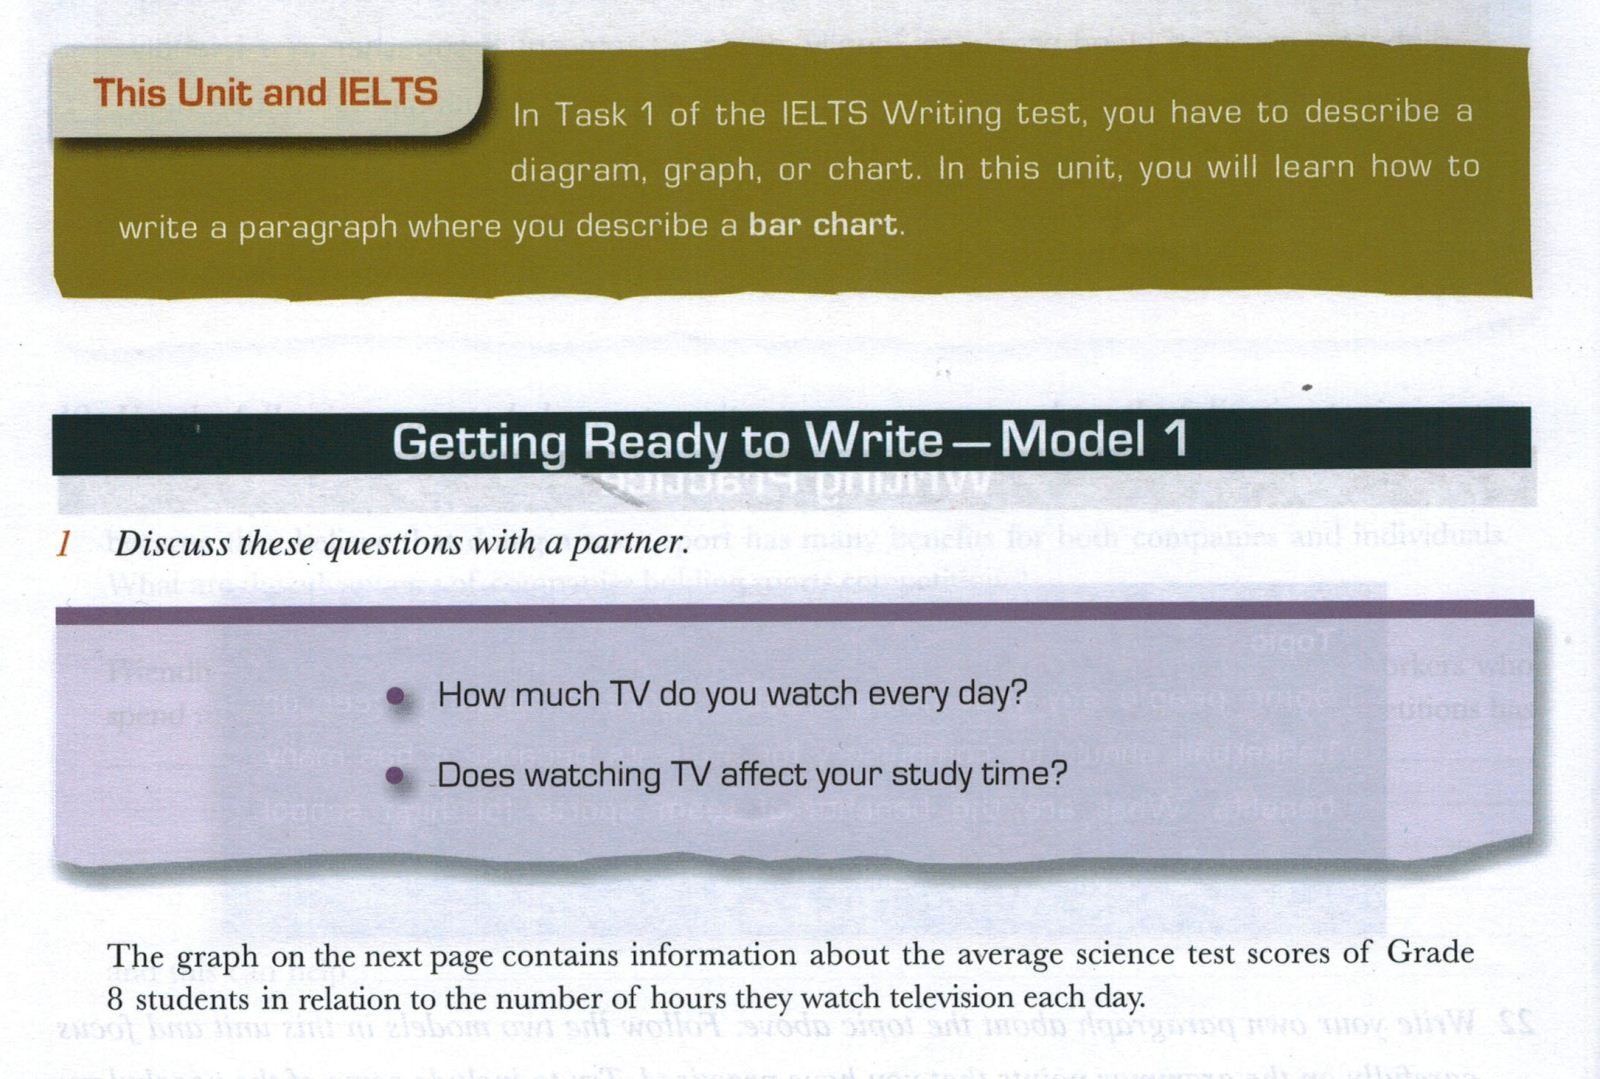 Lessons-for-IELTS-Writing-MEDIA-1